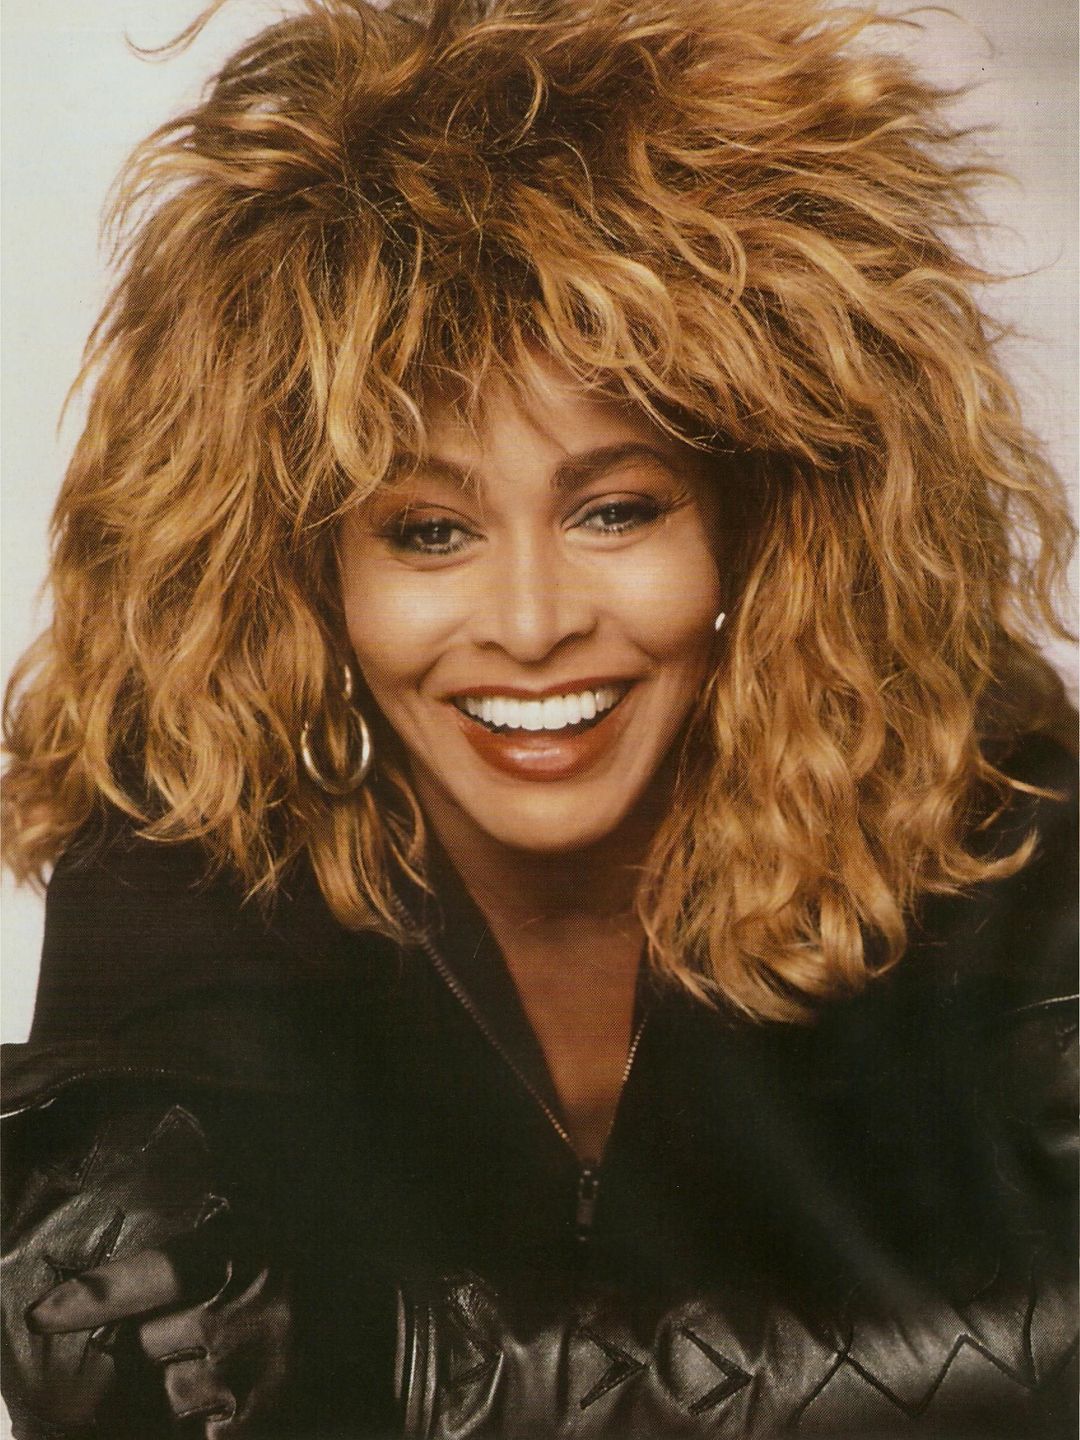 Tina Turner who is her mother